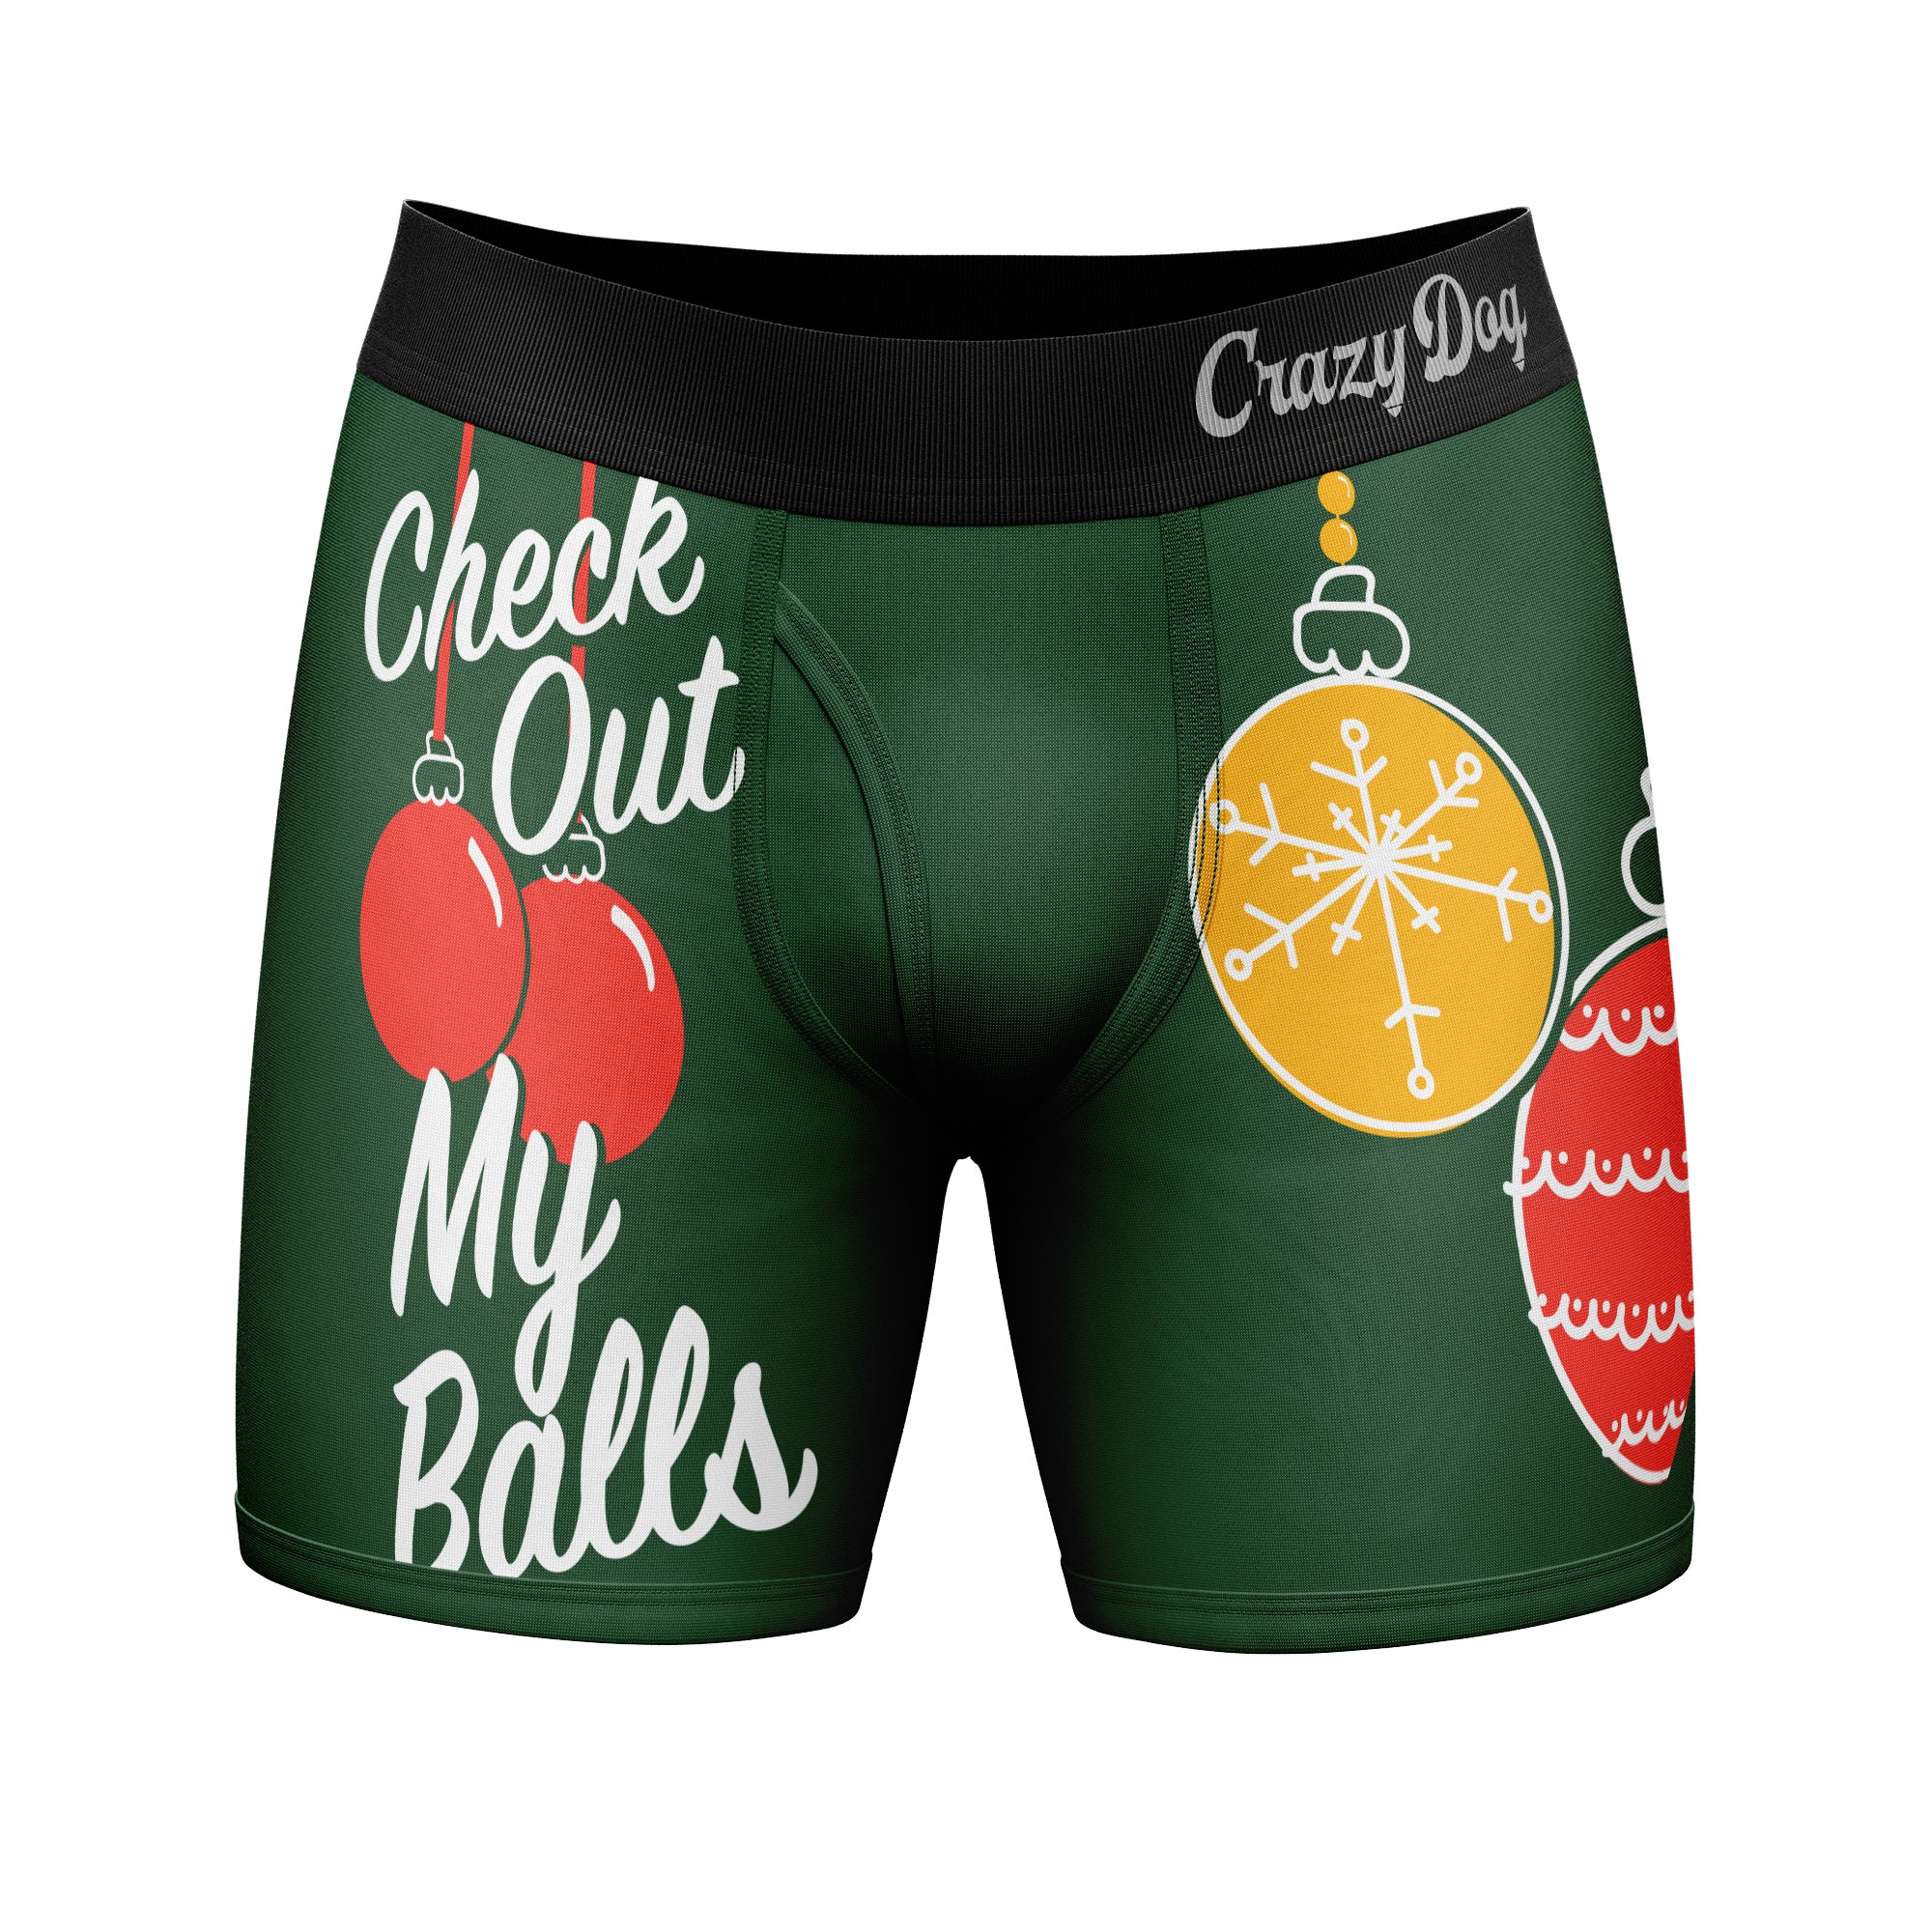 Mens Check out my Balls Boxers Funny Christmas Ornament Underwear